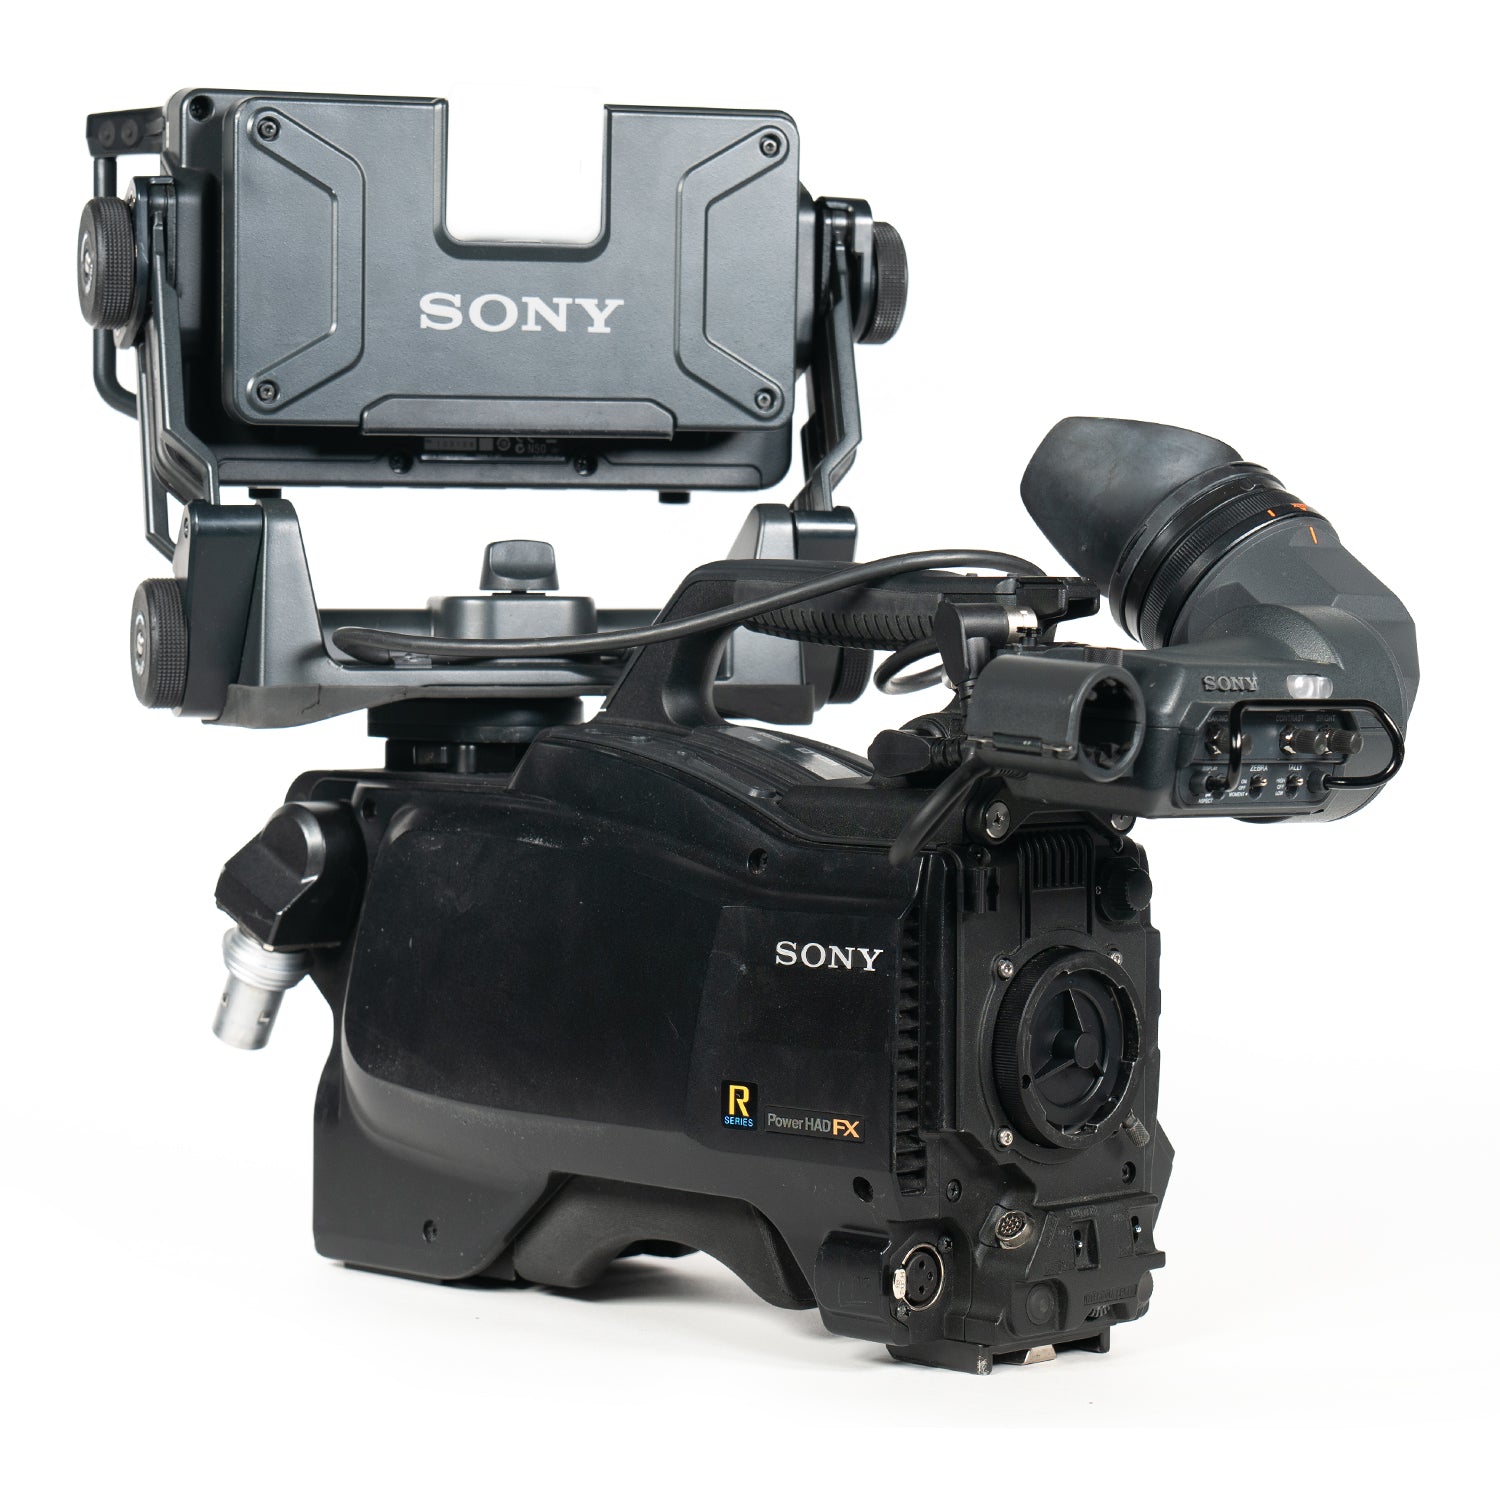 Sony HSC-100R Camera with HSCU-300R CCU and RCP-1500